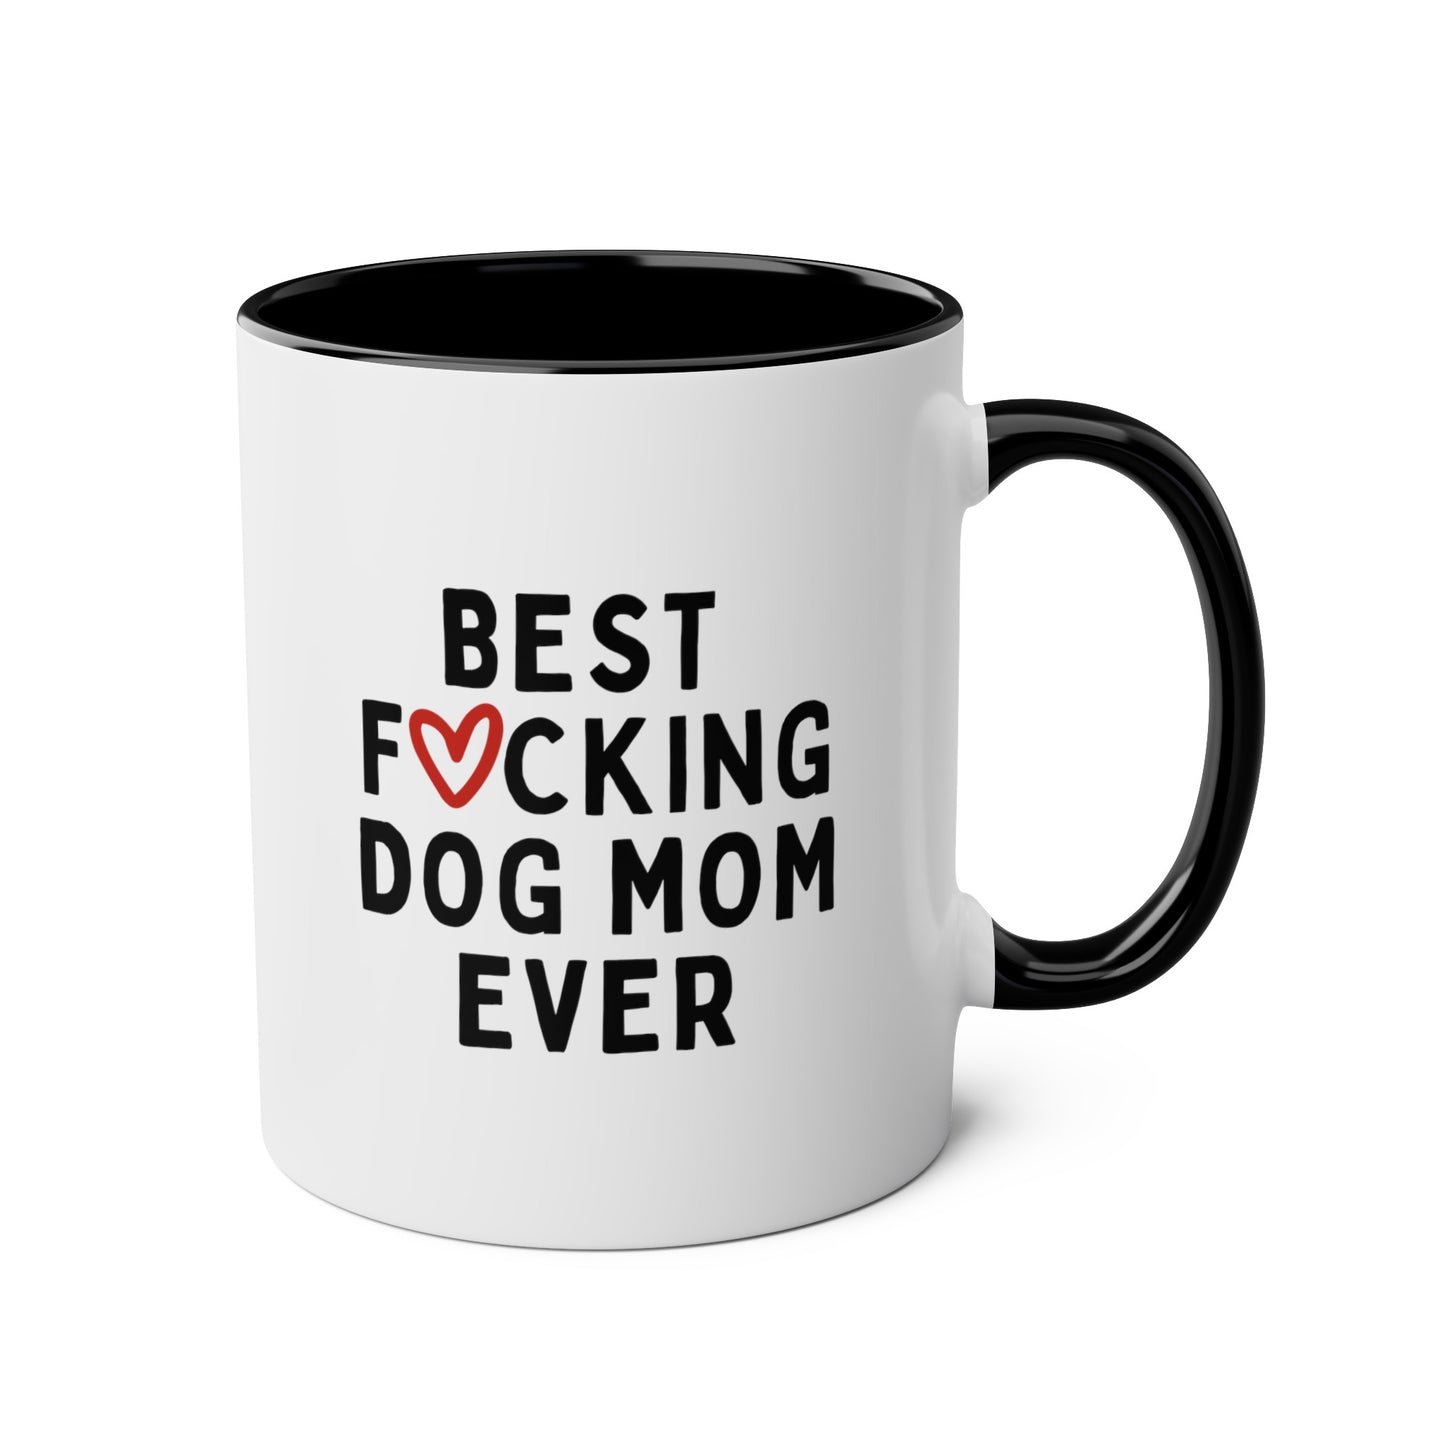 Best Fucking Dog Mom Ever 11oz white with black accent funny large coffee mug gift for furmom pet lover owner cuss word heart waveywares wavey wares wavywares wavy wares